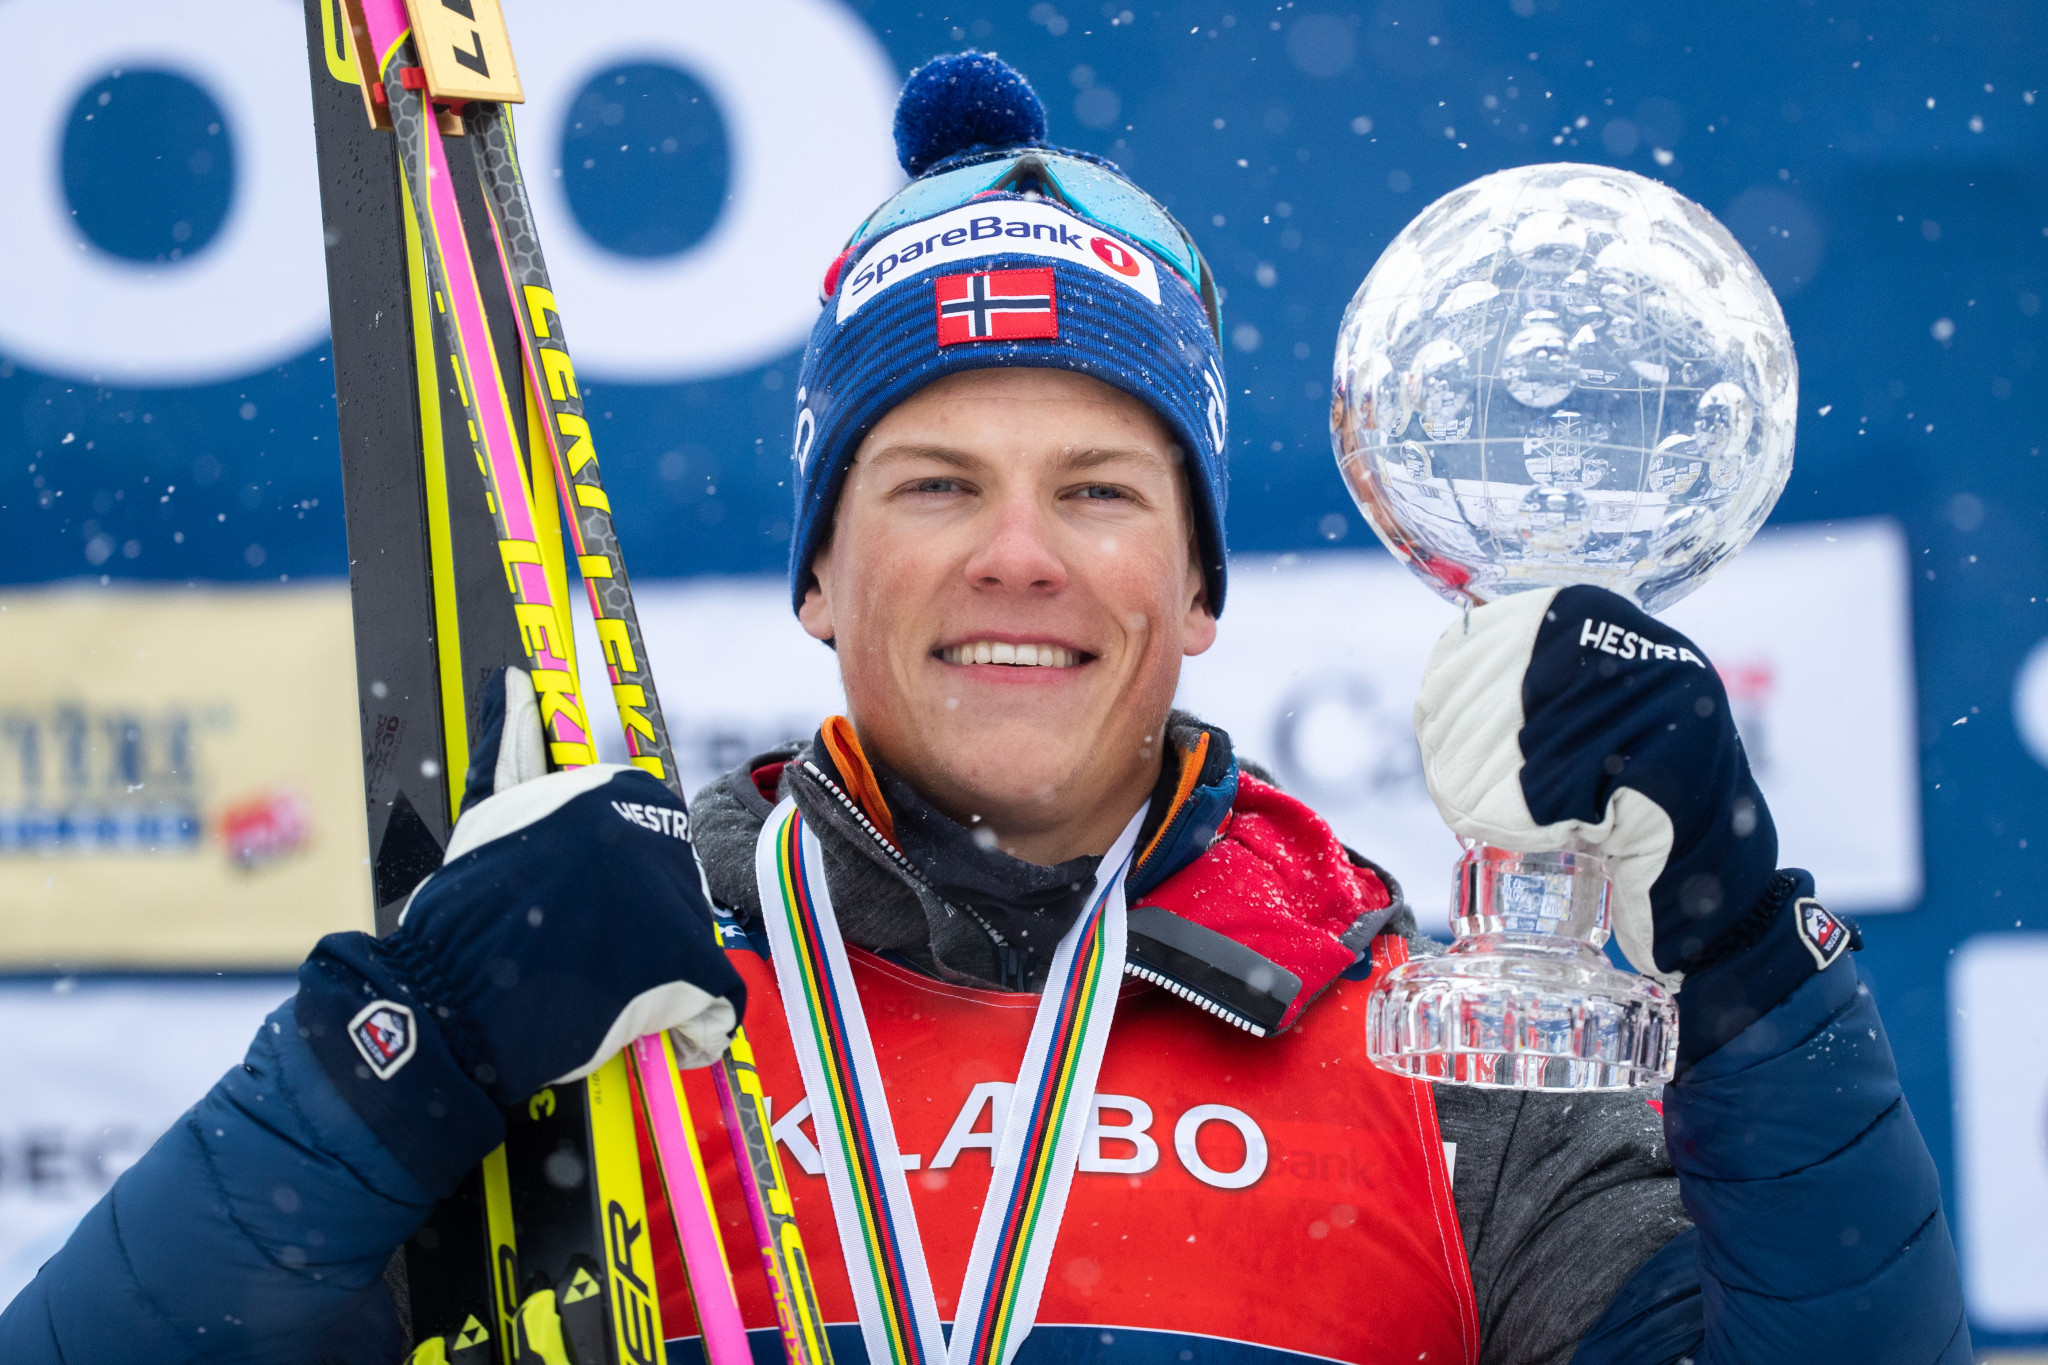 Klæbo and Østberg seal FIS Cross-Country World Cup titles for Norway as season ends 